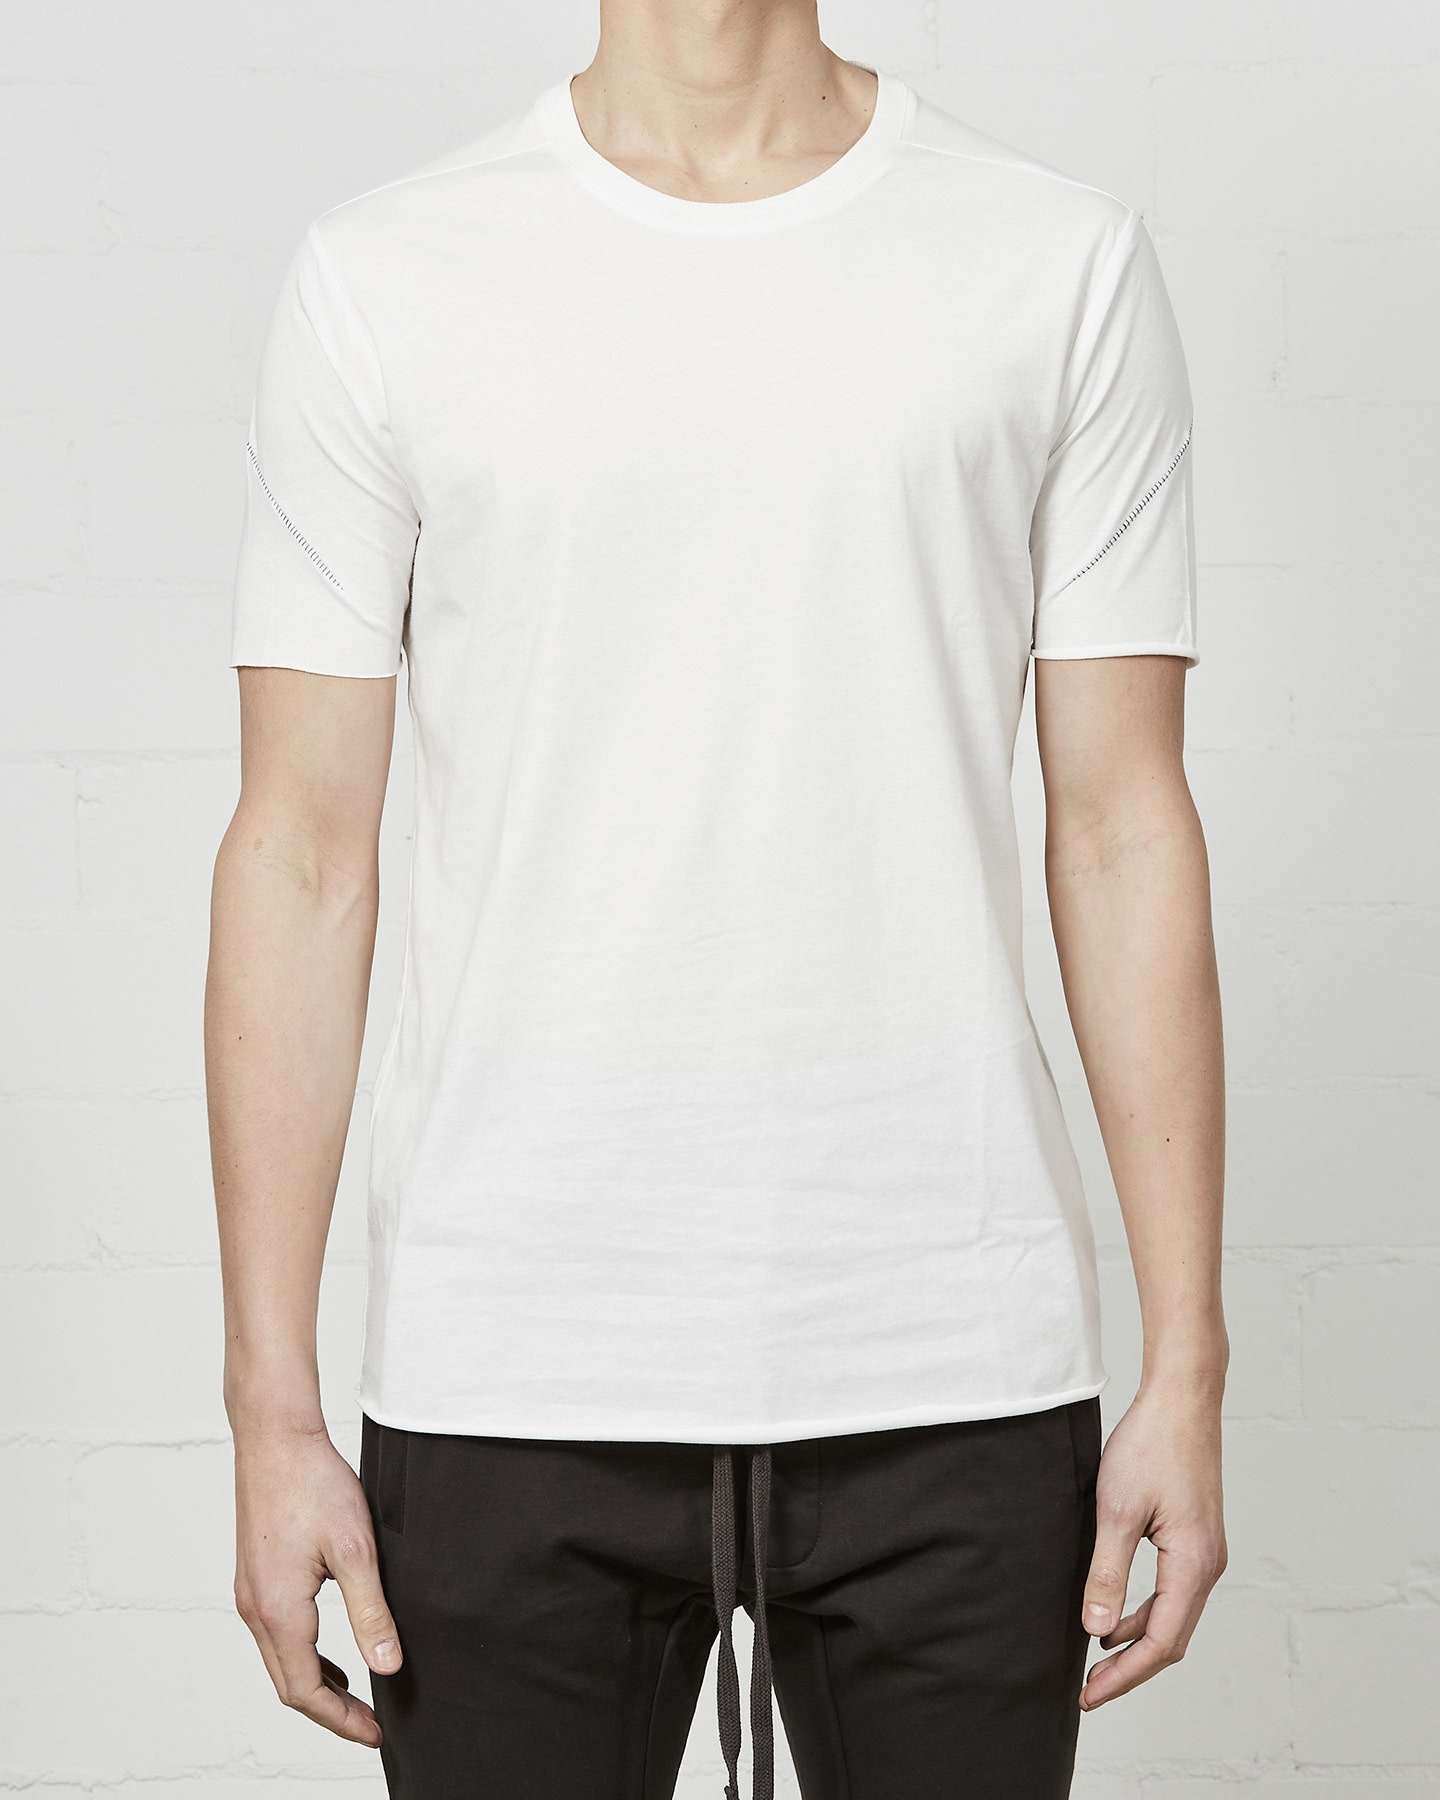 STITCHED BACK FITTED COTTON CREW - OFF WHITE